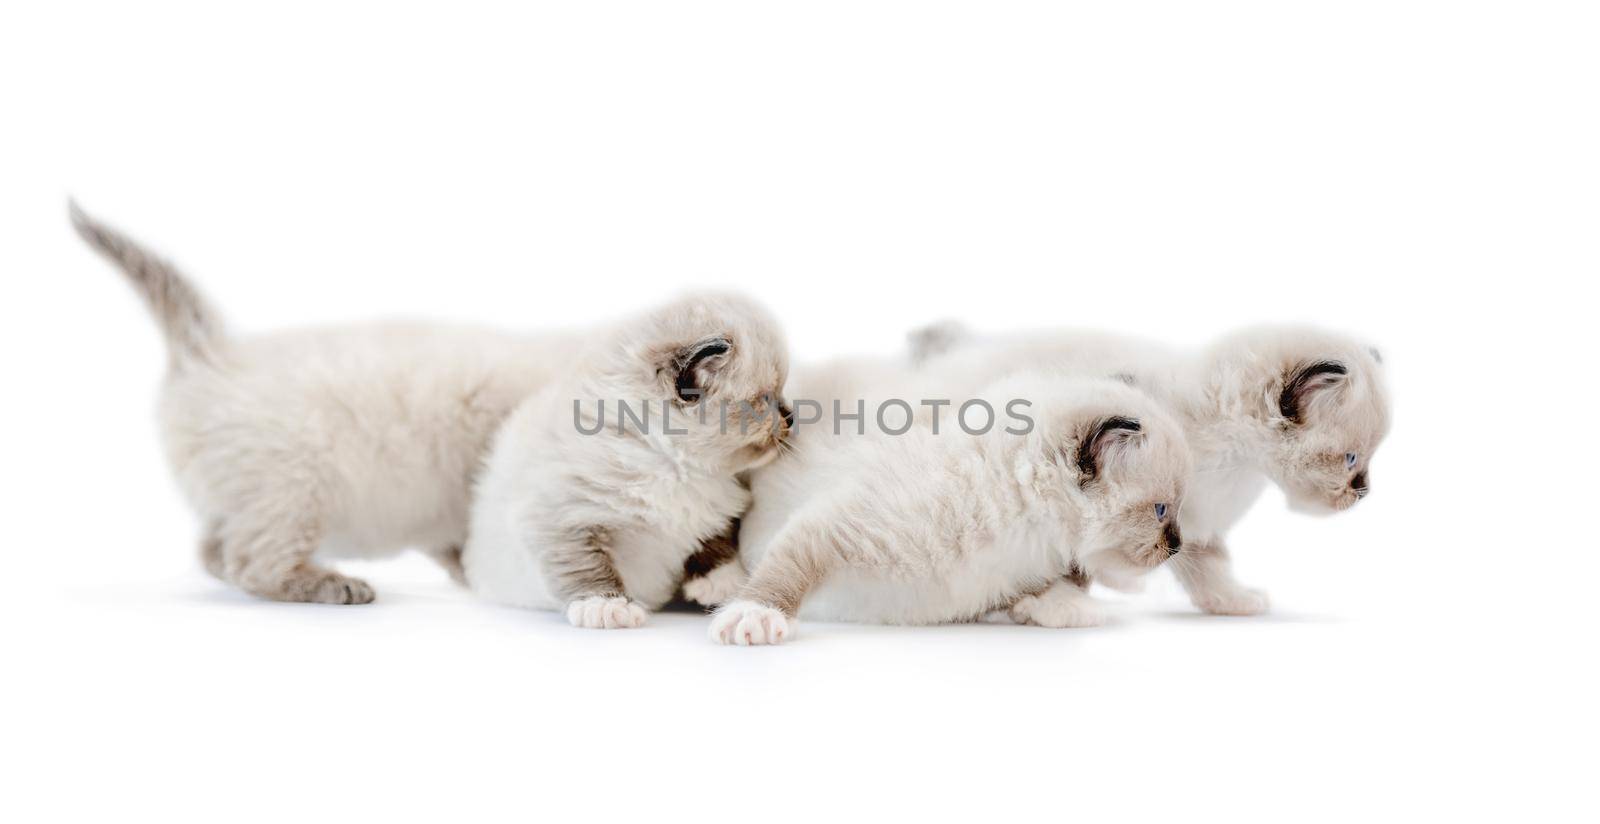 Four ragdoll kittens isolated on white background with copyspace. Adorable fluffy purebred kitty pets standing together and looking back